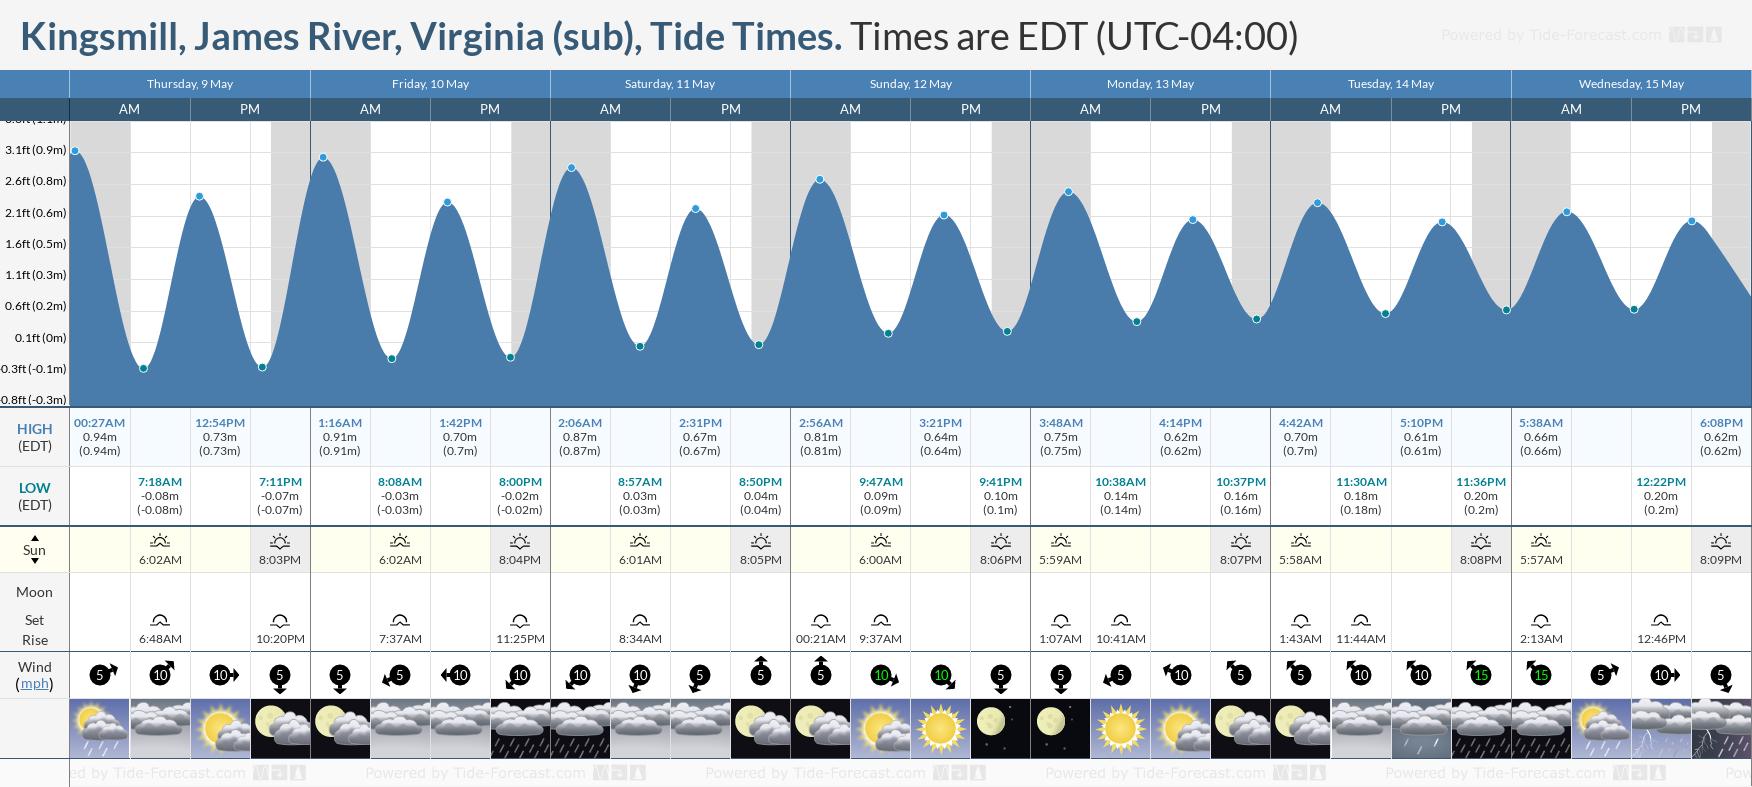 Kingsmill, James River, Virginia (sub) Tide Chart including high and low tide times for the next 7 days